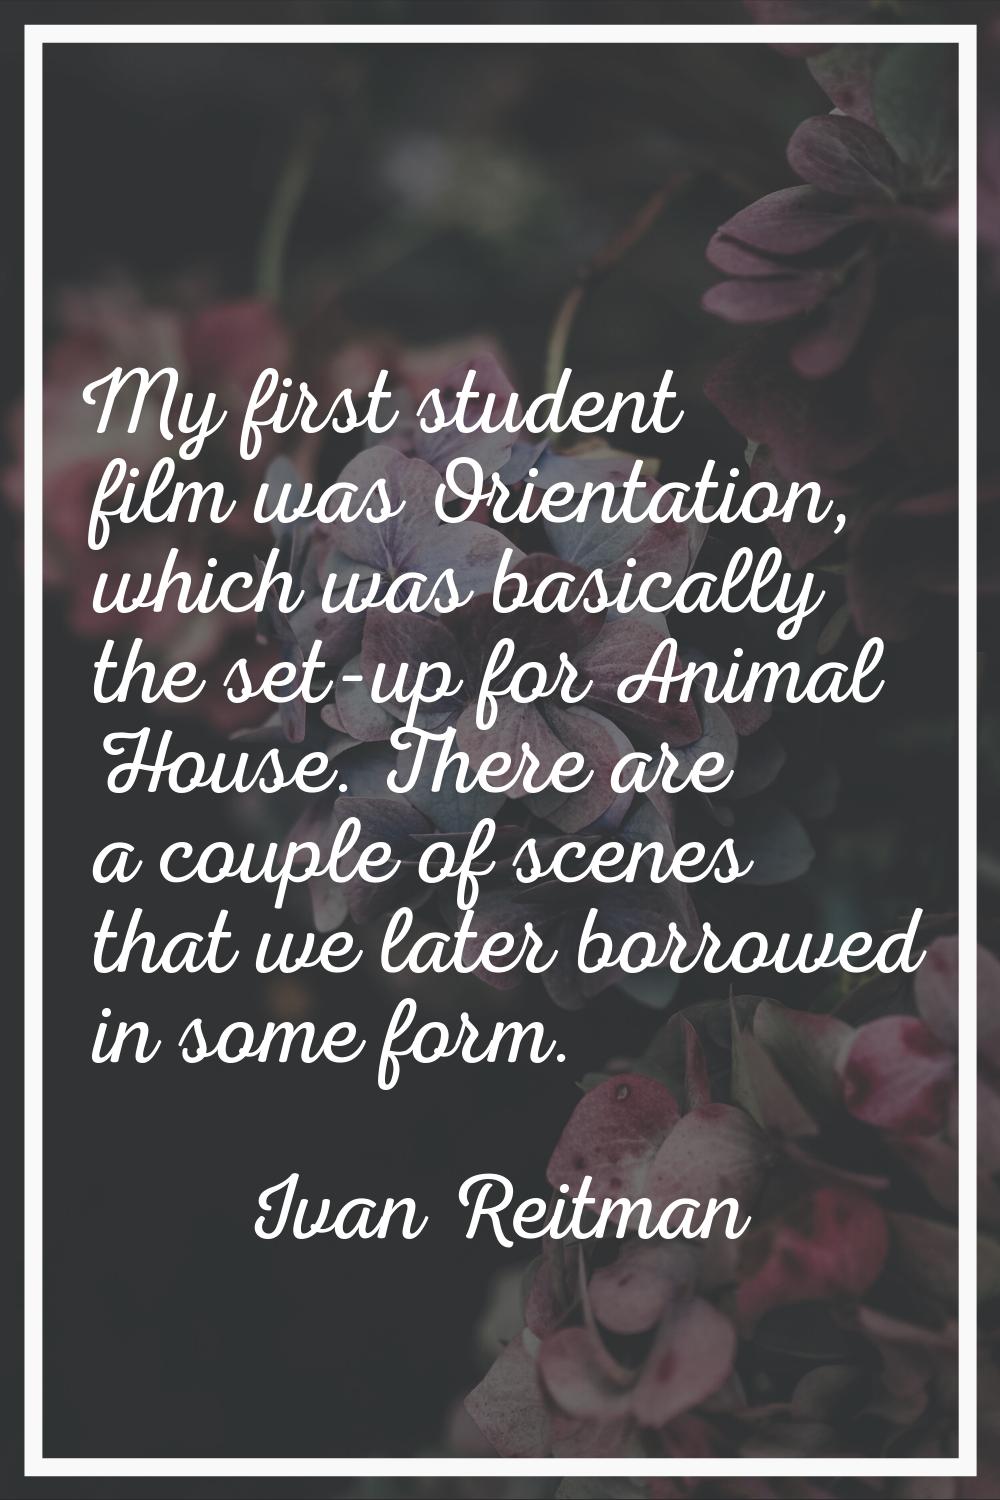 My first student film was Orientation, which was basically the set-up for Animal House. There are a